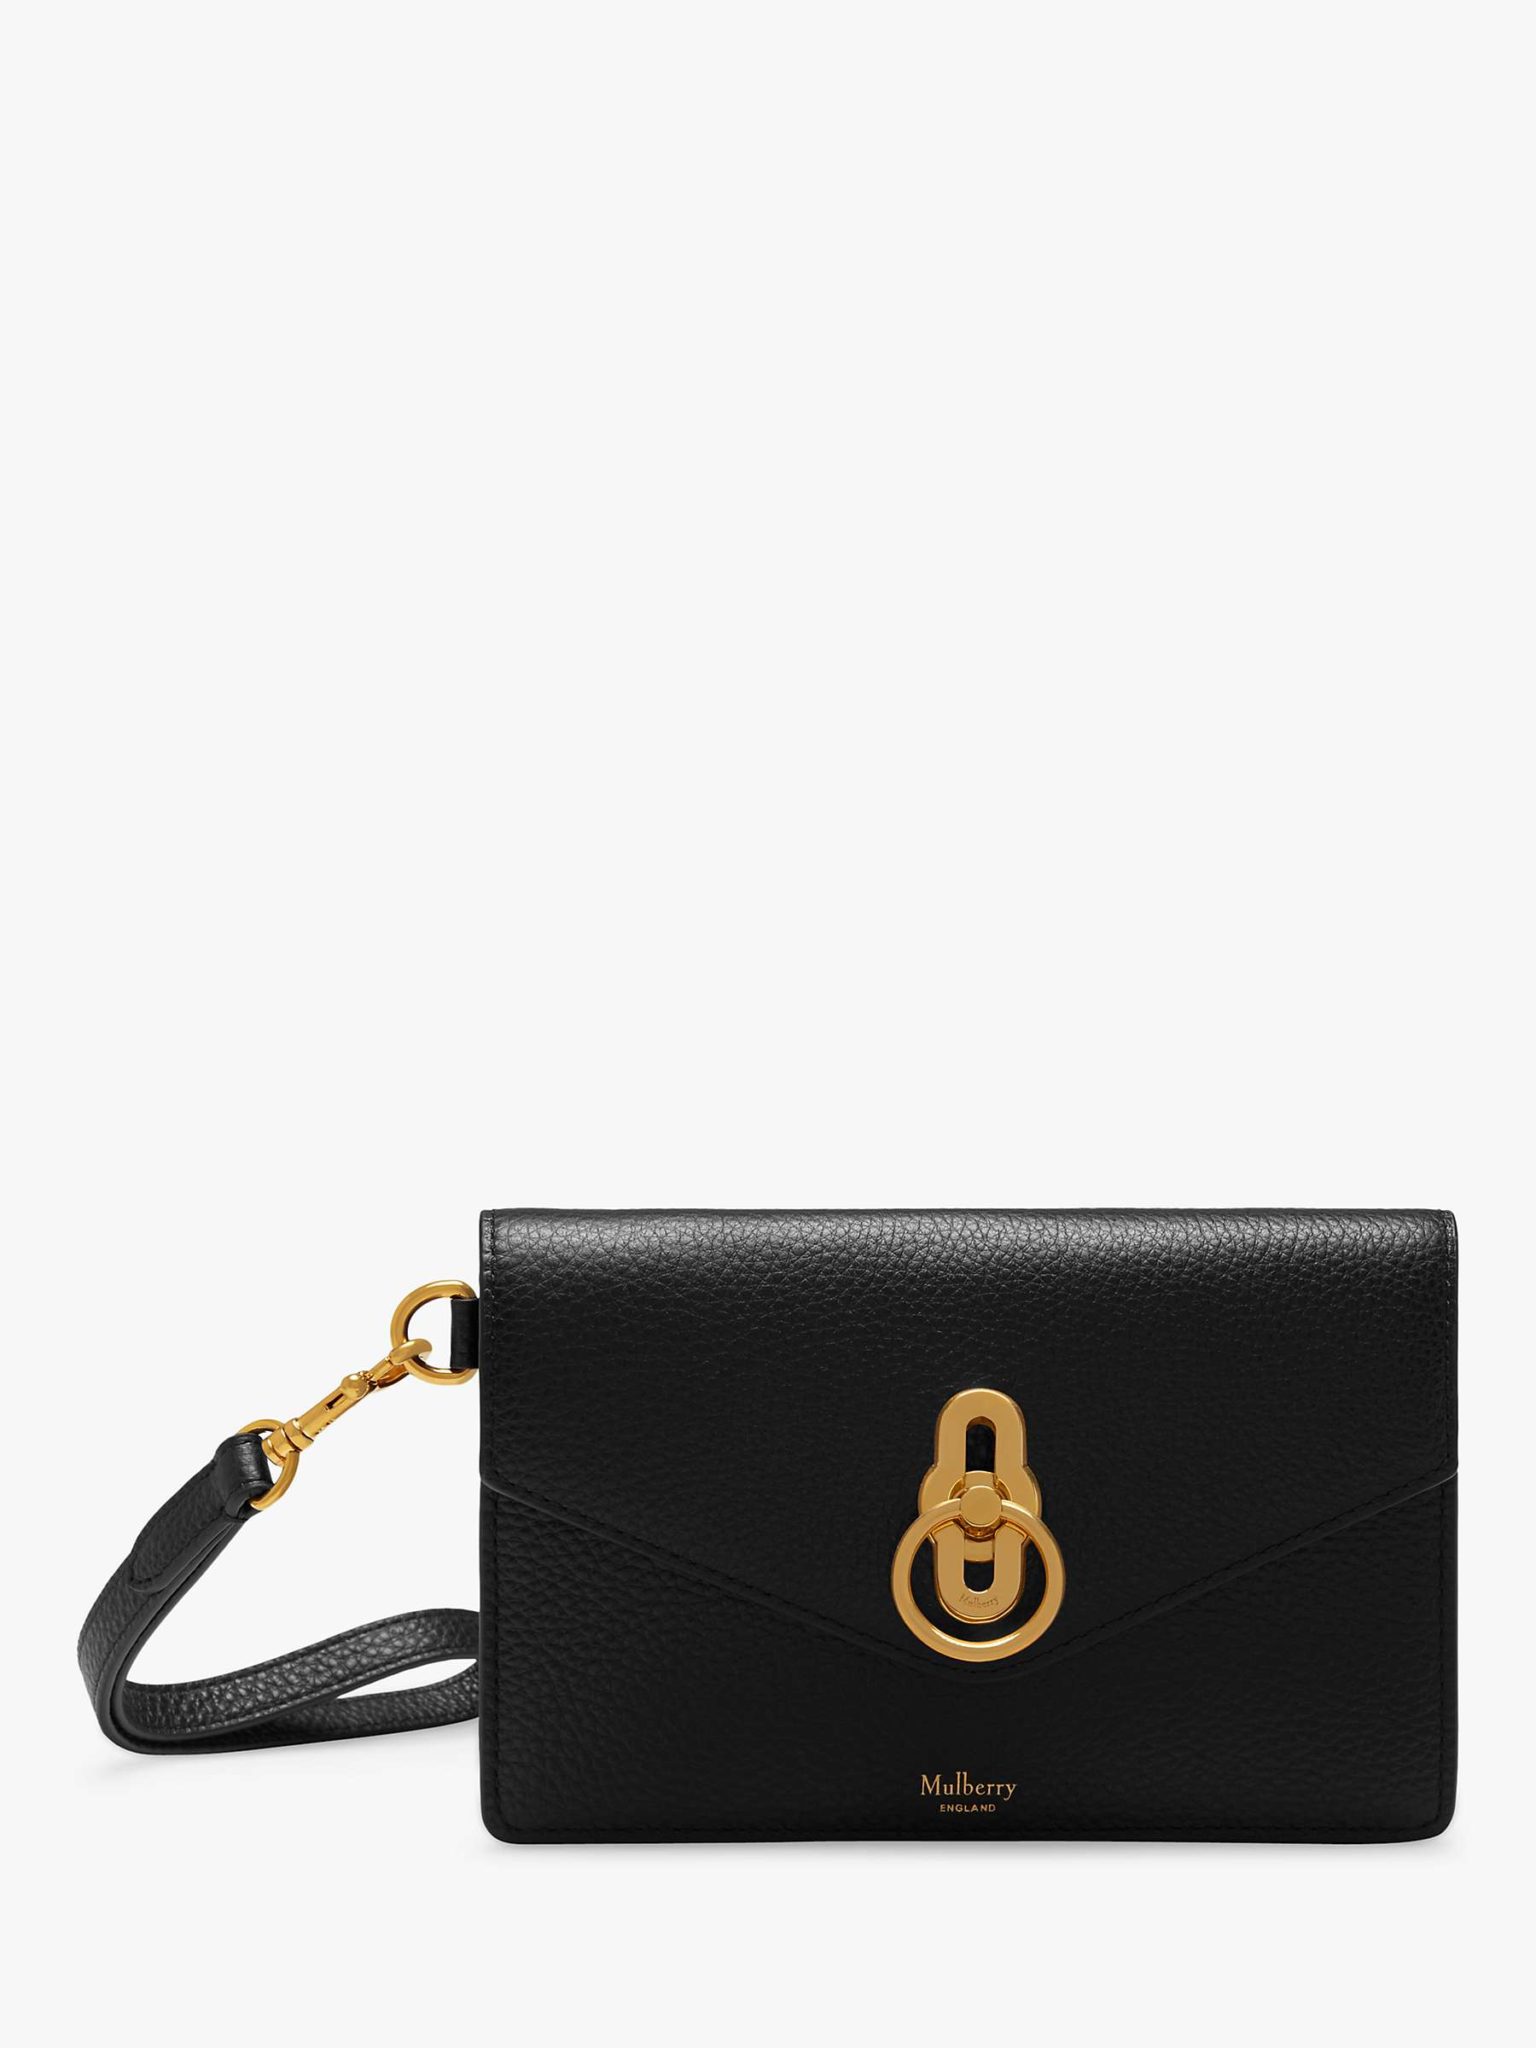 Mulberry Amberley Small Classic Grain Leather Phone Clutch Purse, Black ...